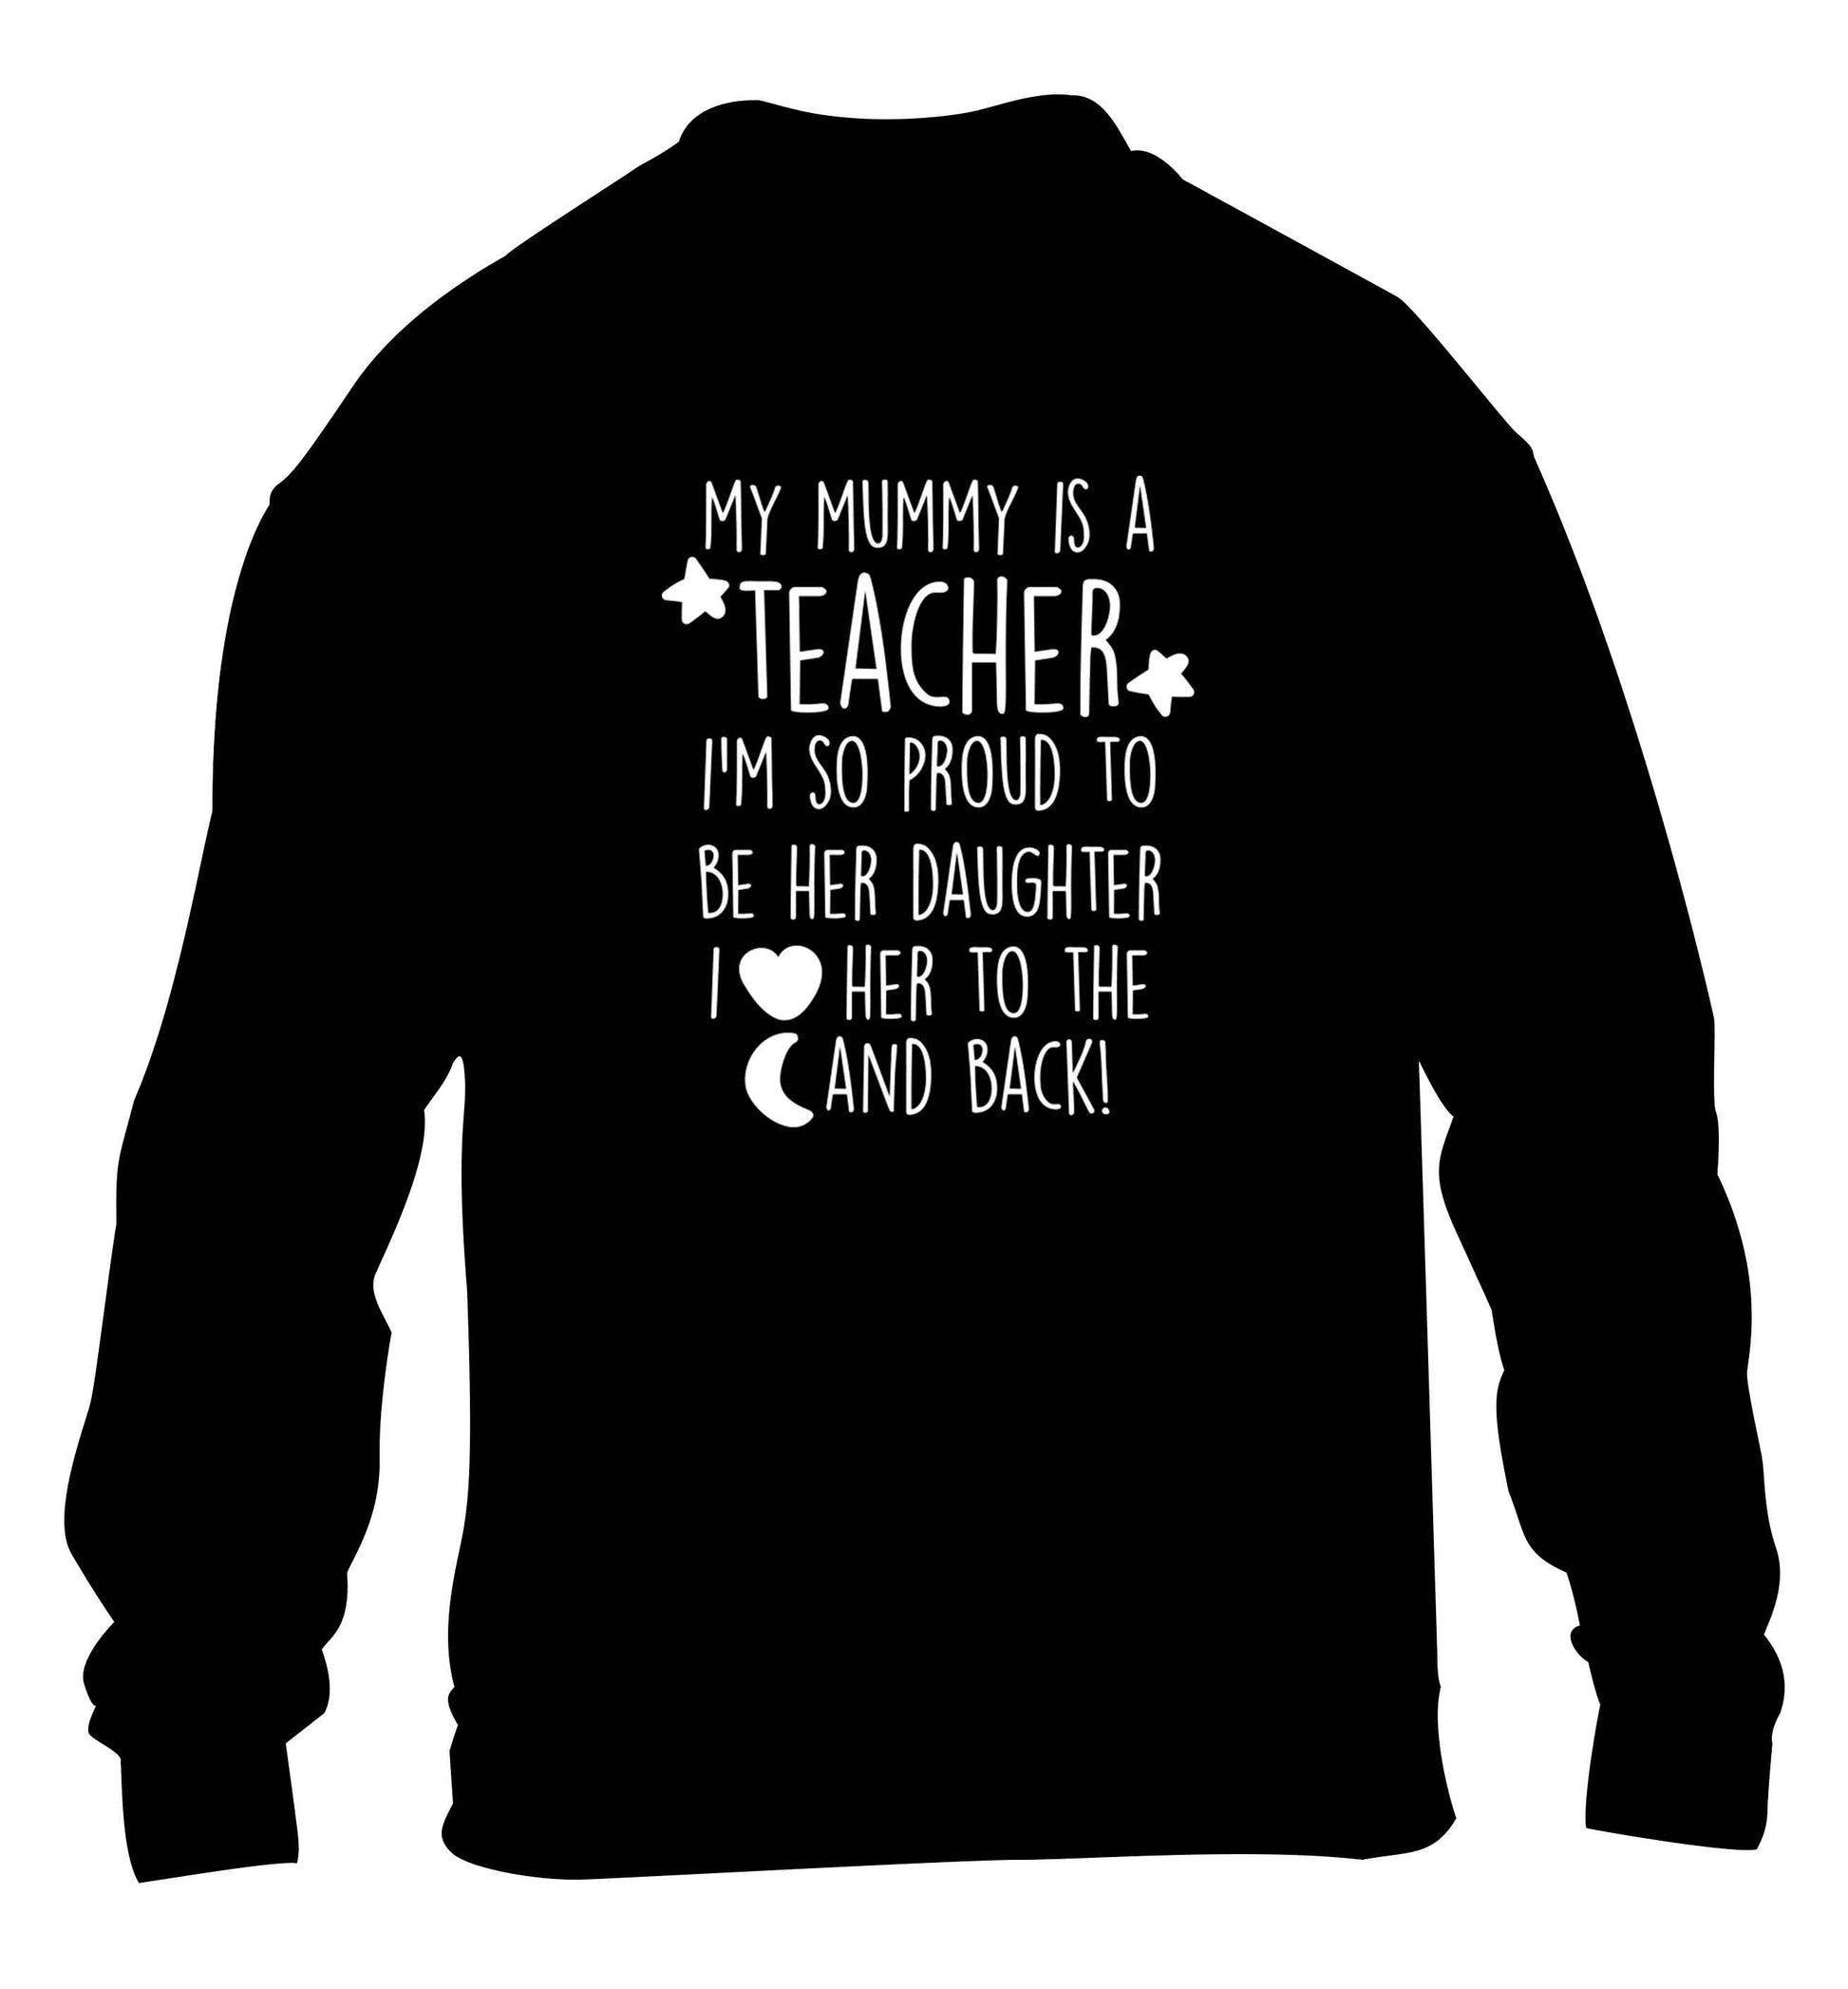 My mummy is a teacher I'm so proud to be her daughter I love her to the moon and back children's black sweater 12-13 Years